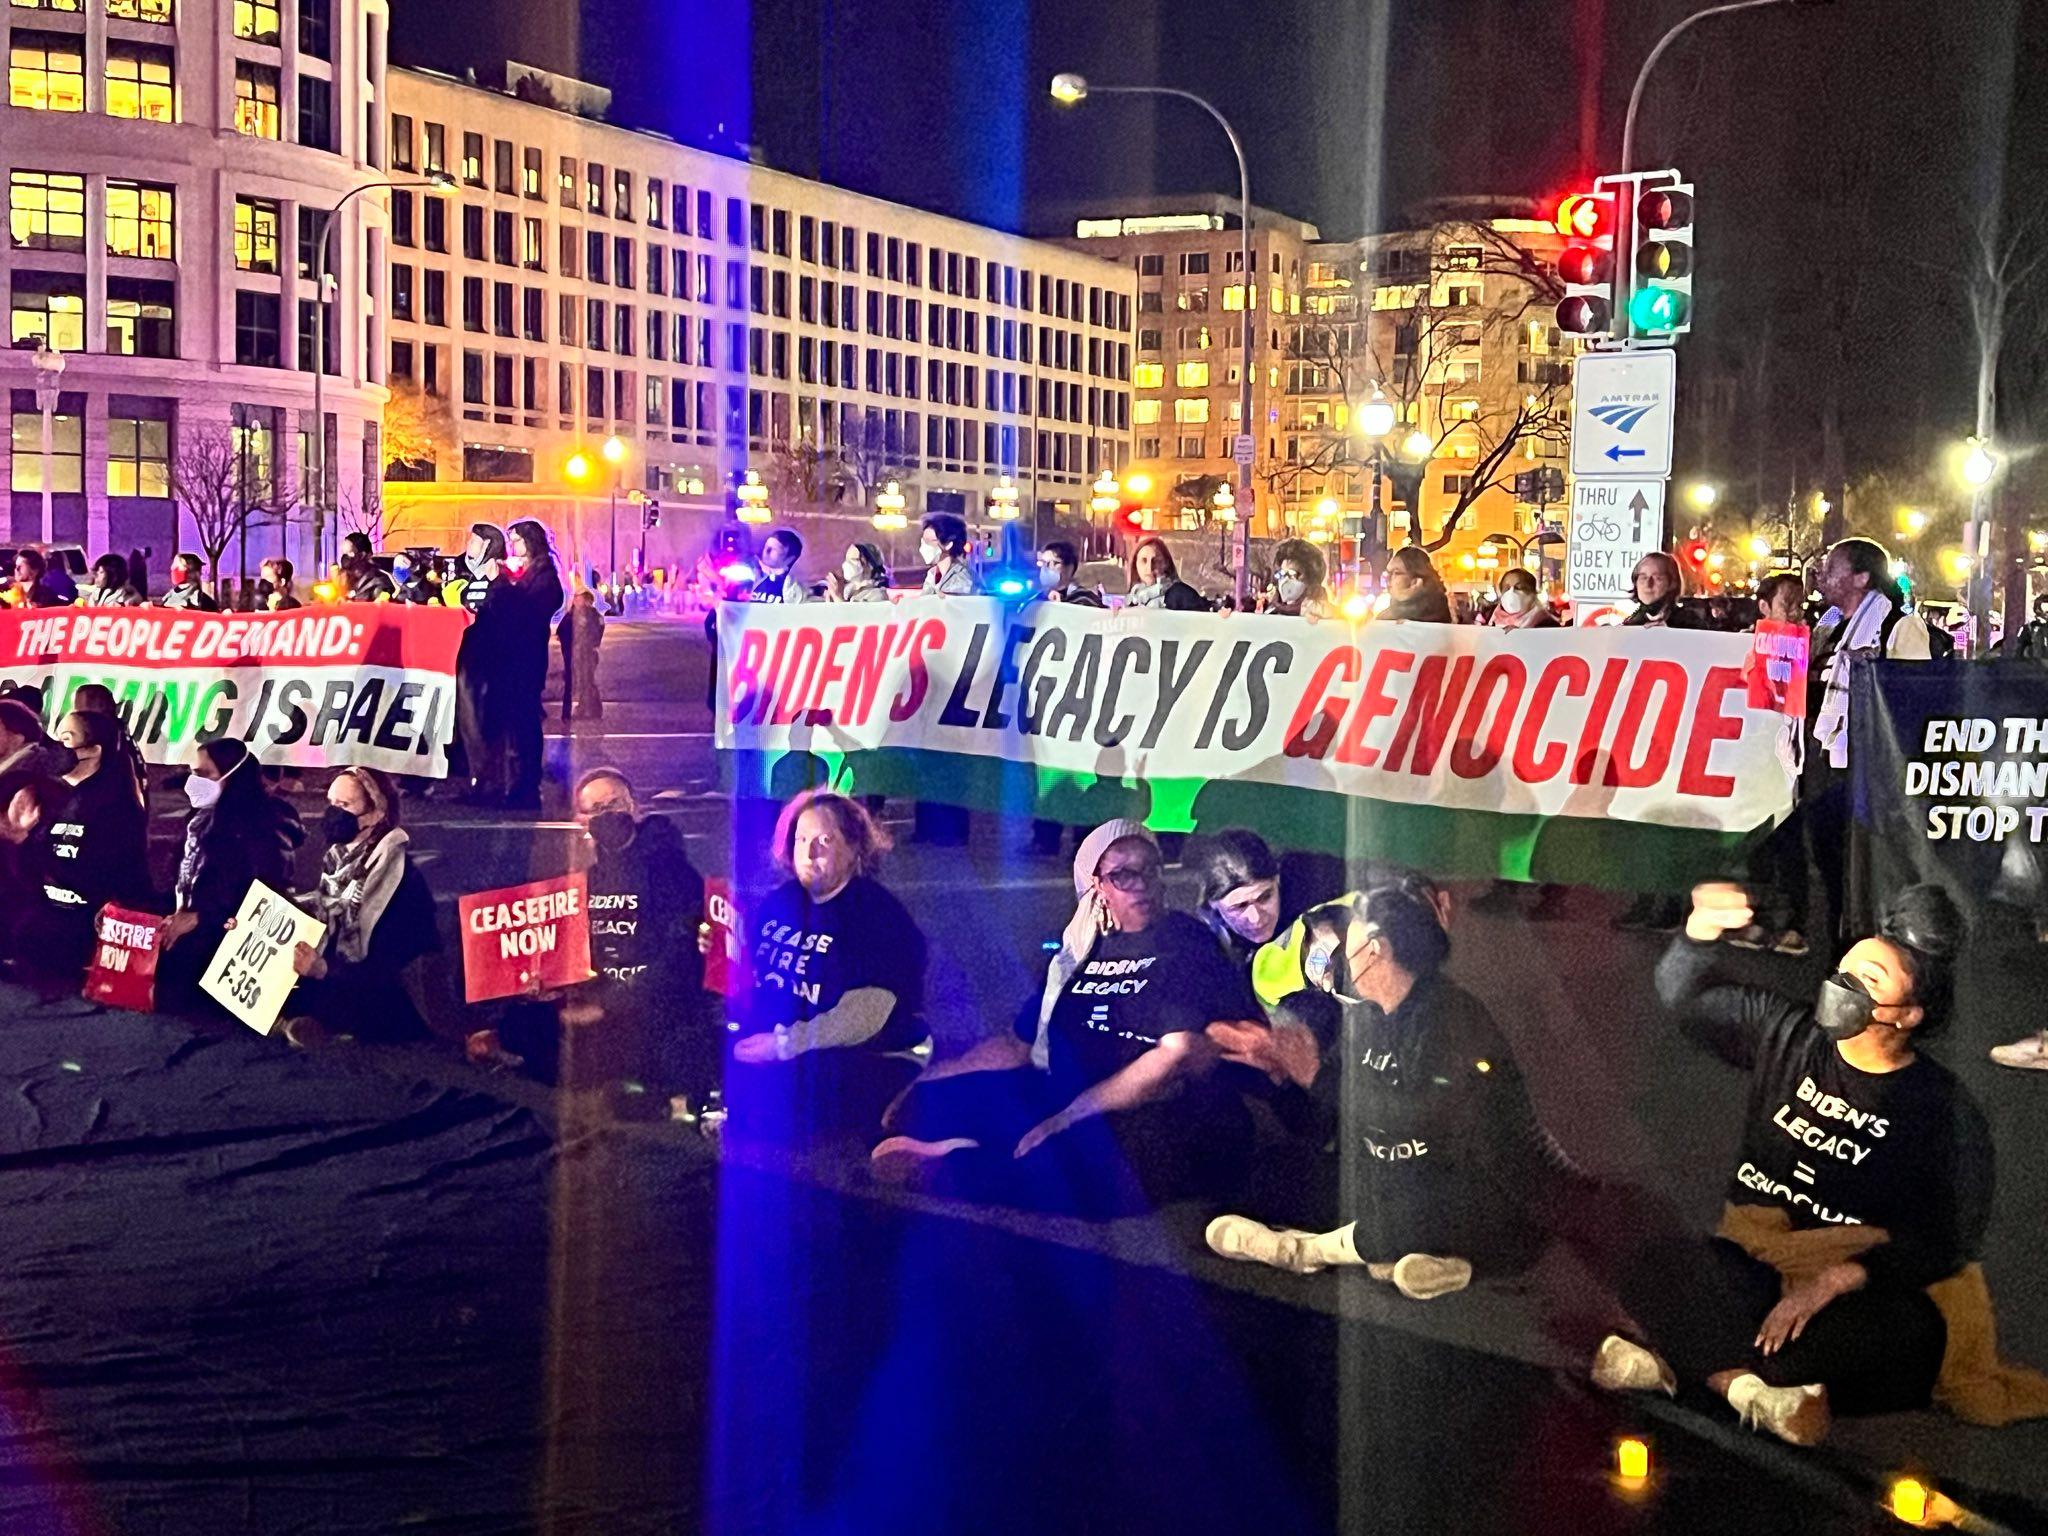 Protestors block the street with sign that reads 